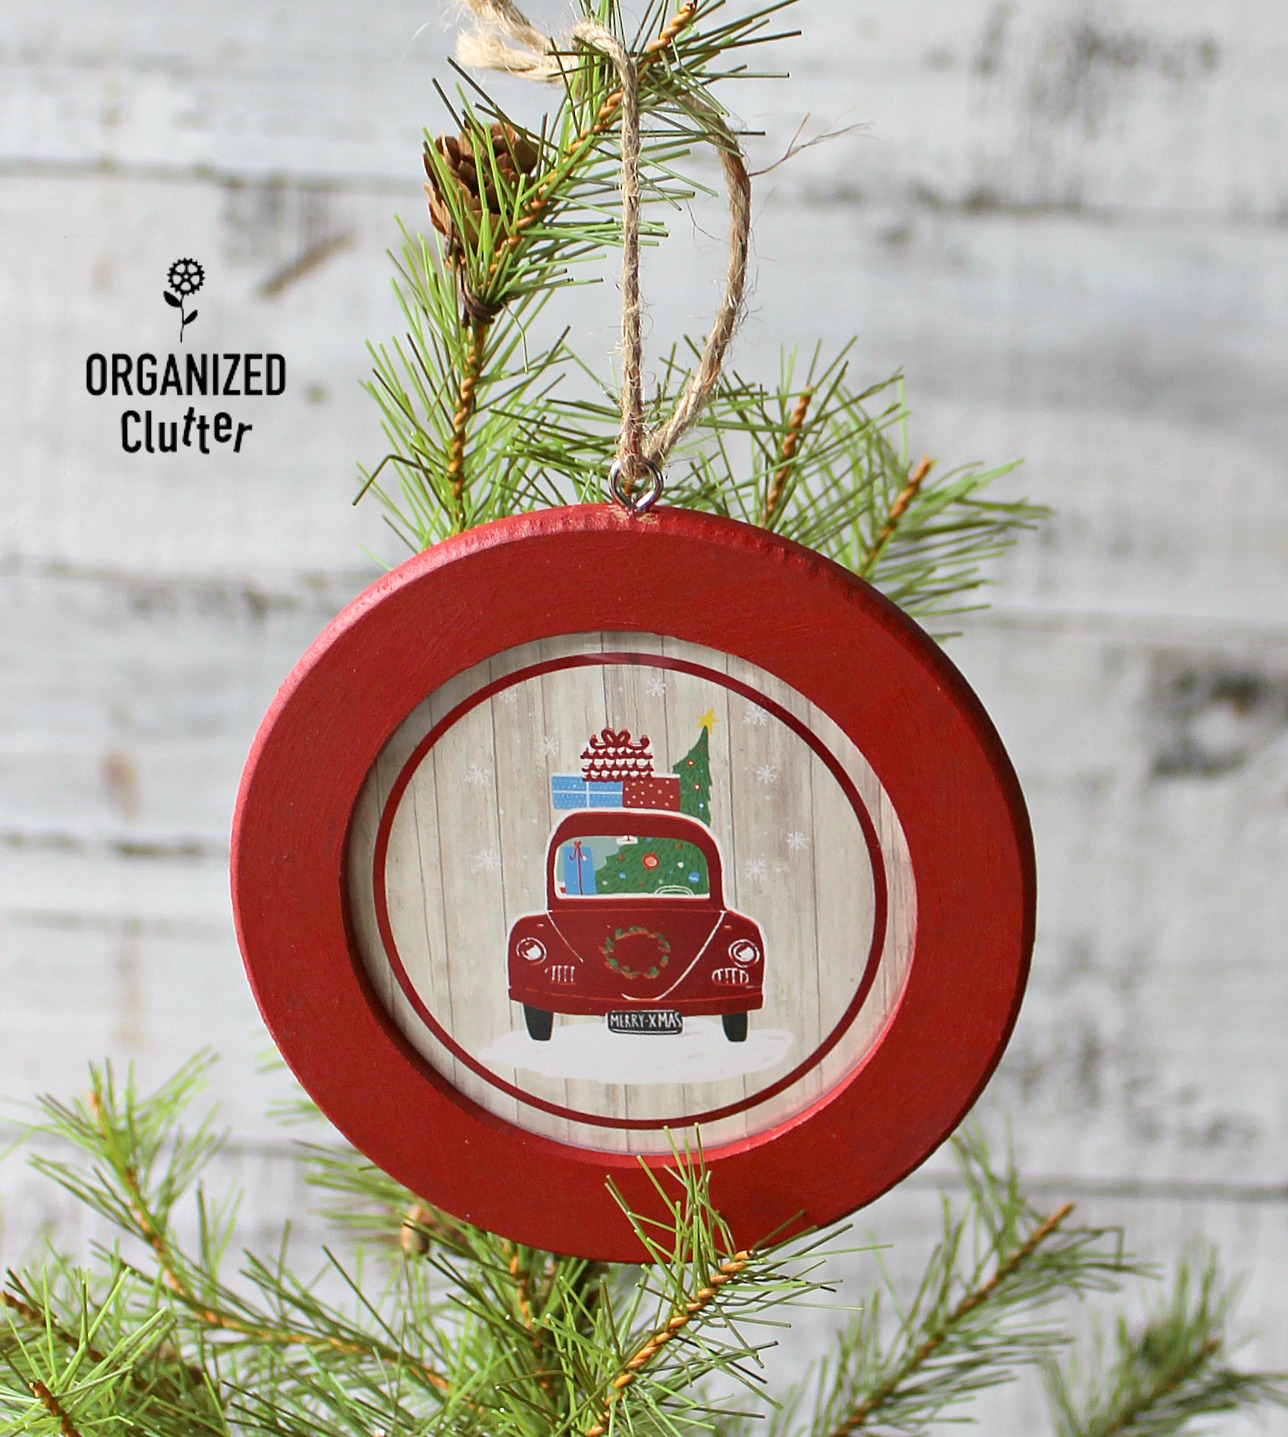 Semi-Homemade Round Picture Frame Christmas Ornaments - Organized Clutter